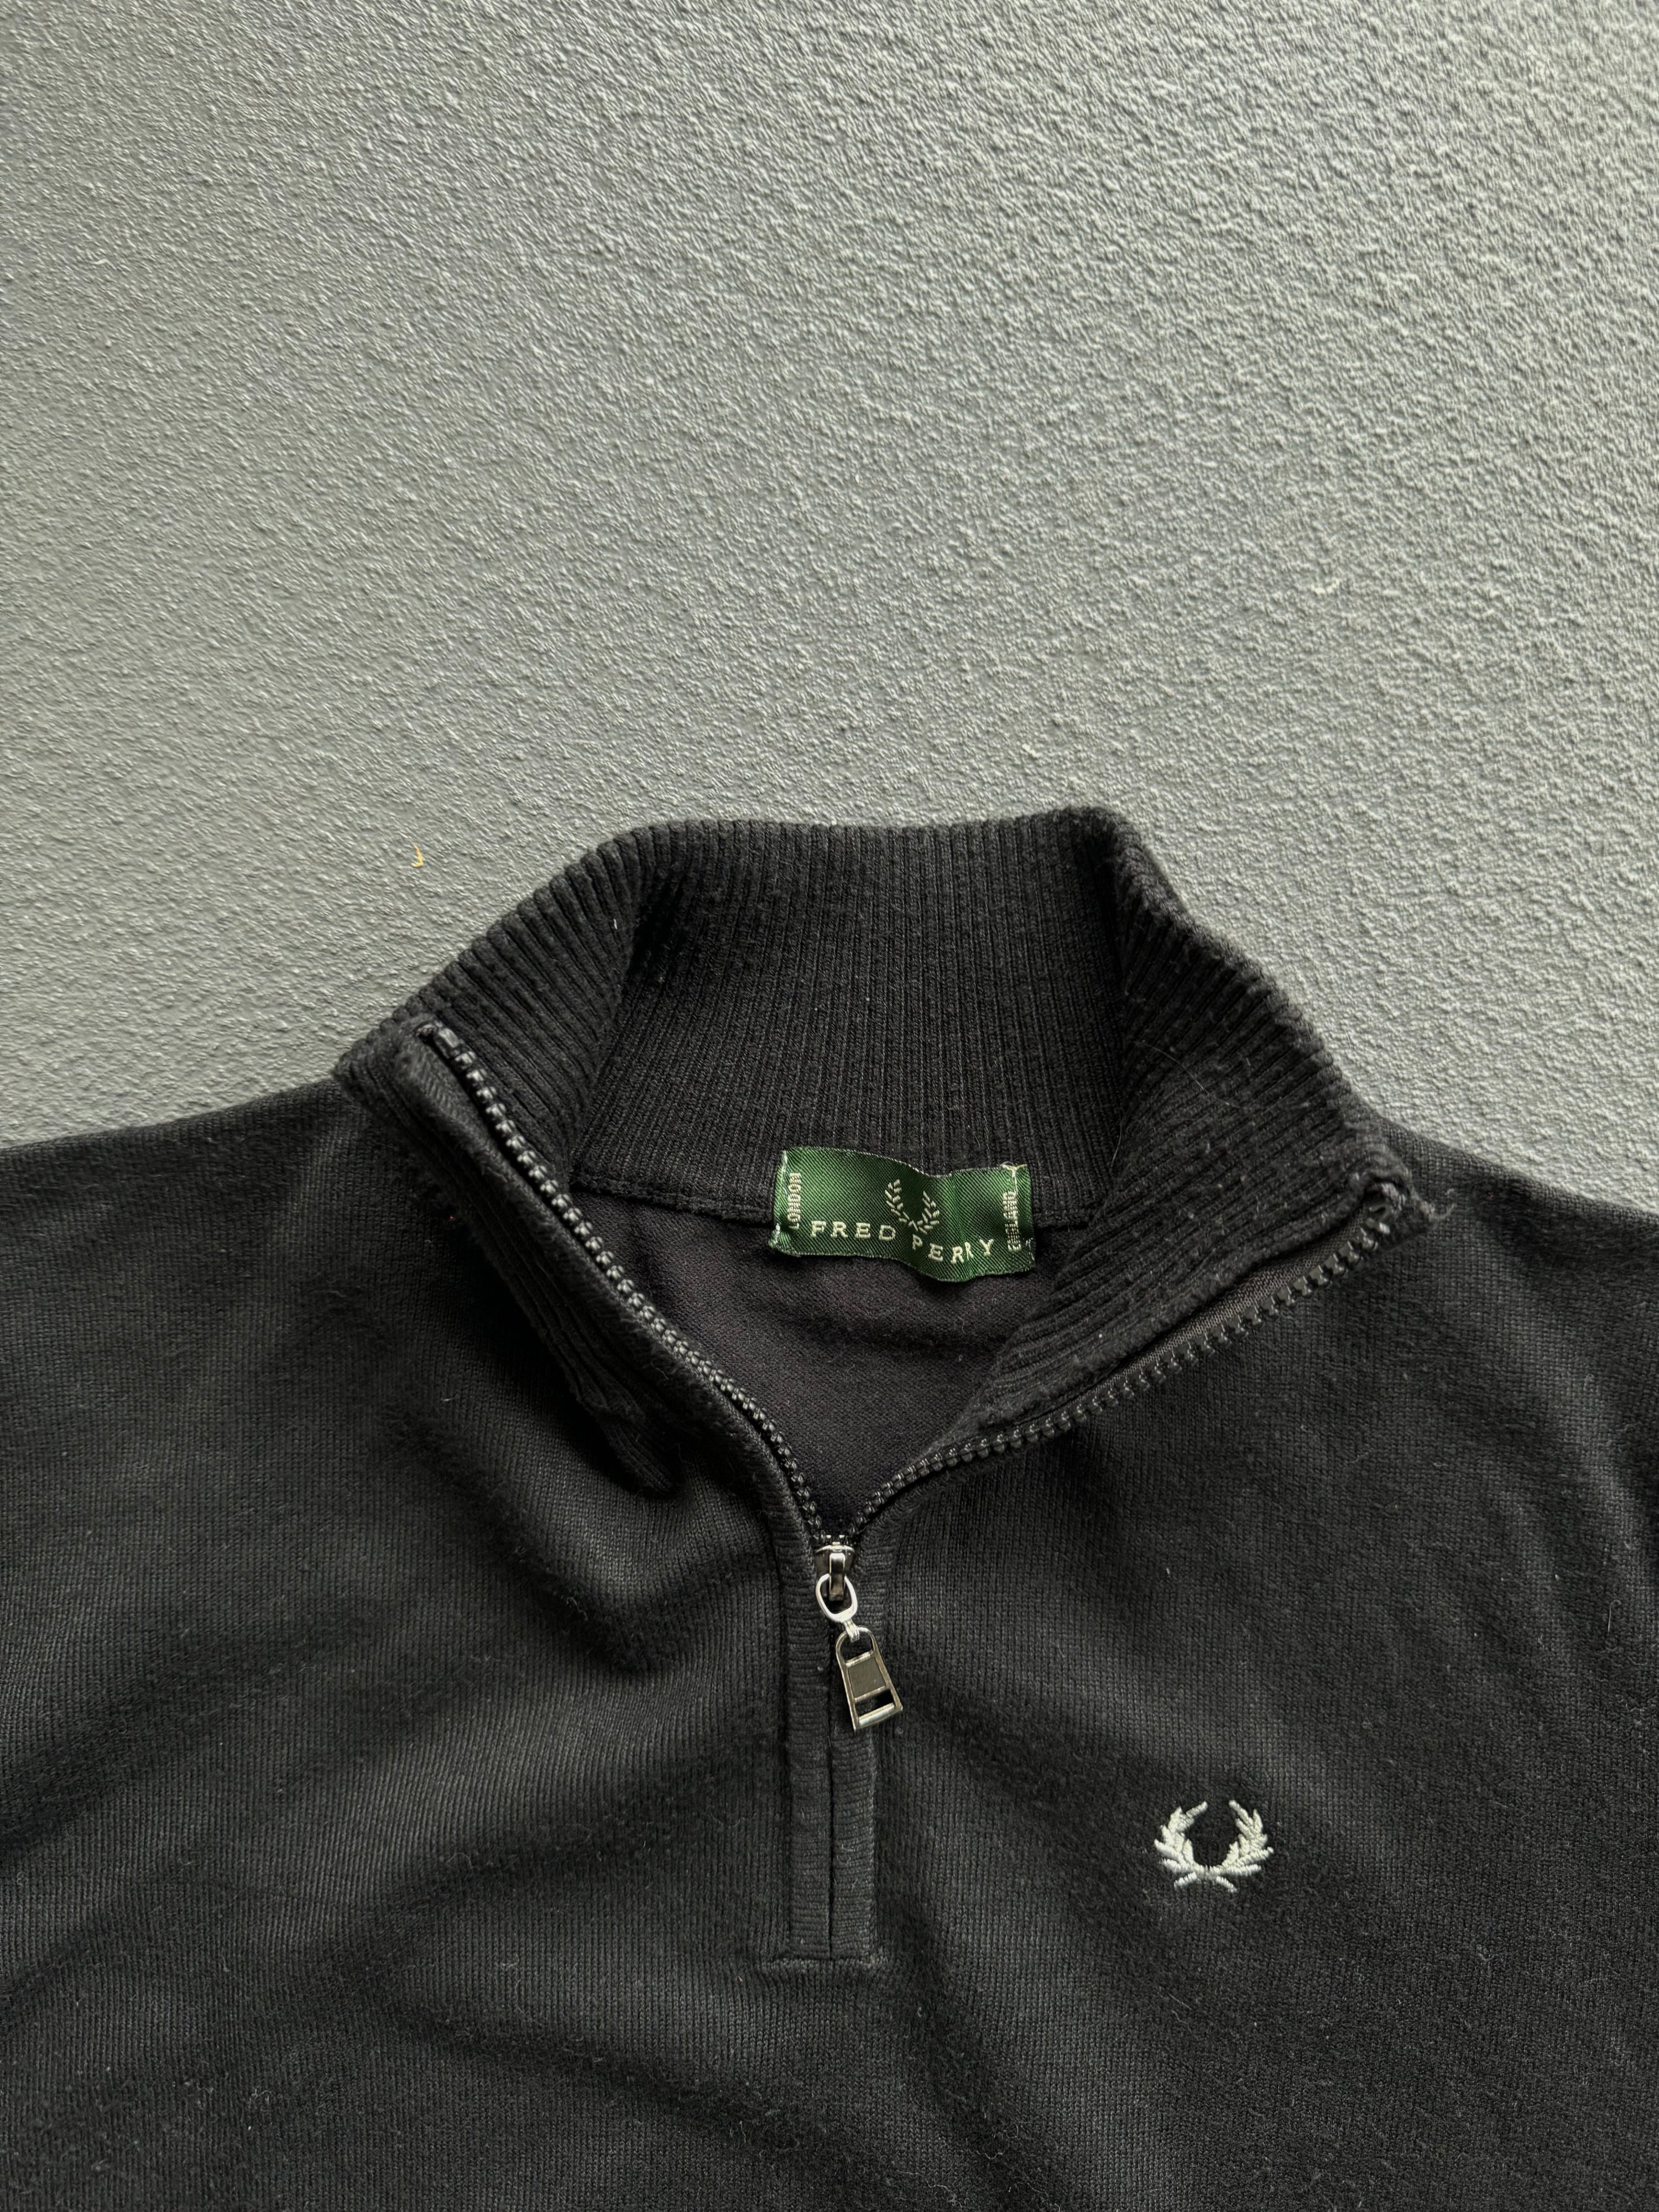 Early 2000s Fred Perry Knit 1/4 Zip Sweater Troyer (M/L)